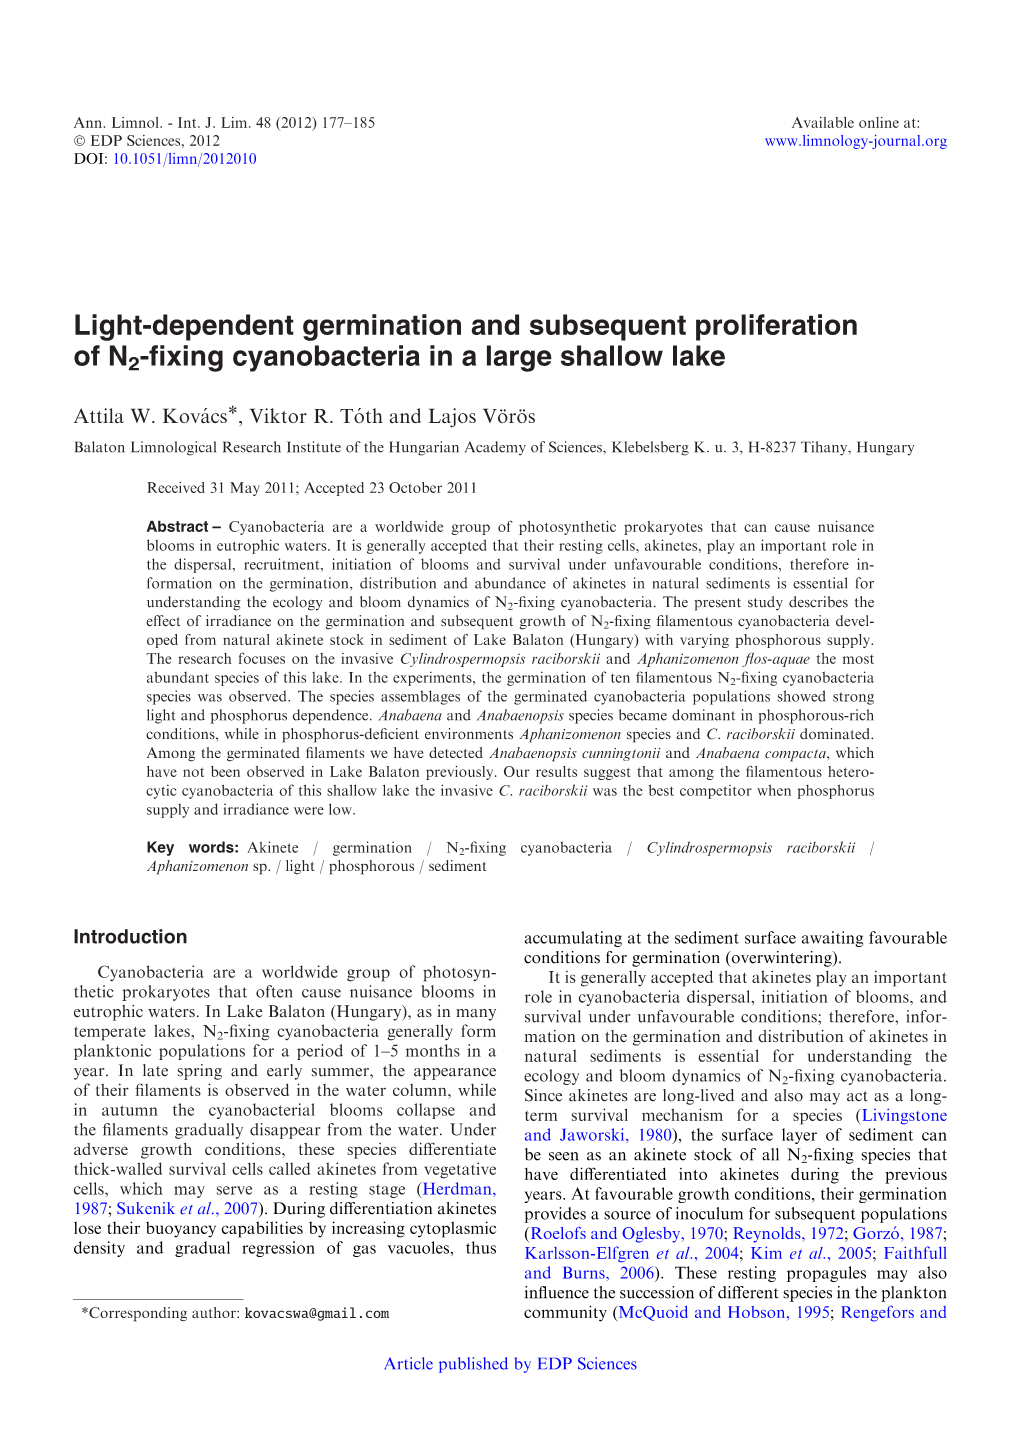 Light-Dependent Germination and Subsequent Proliferation of N2-ﬁxing Cyanobacteria in a Large Shallow Lake